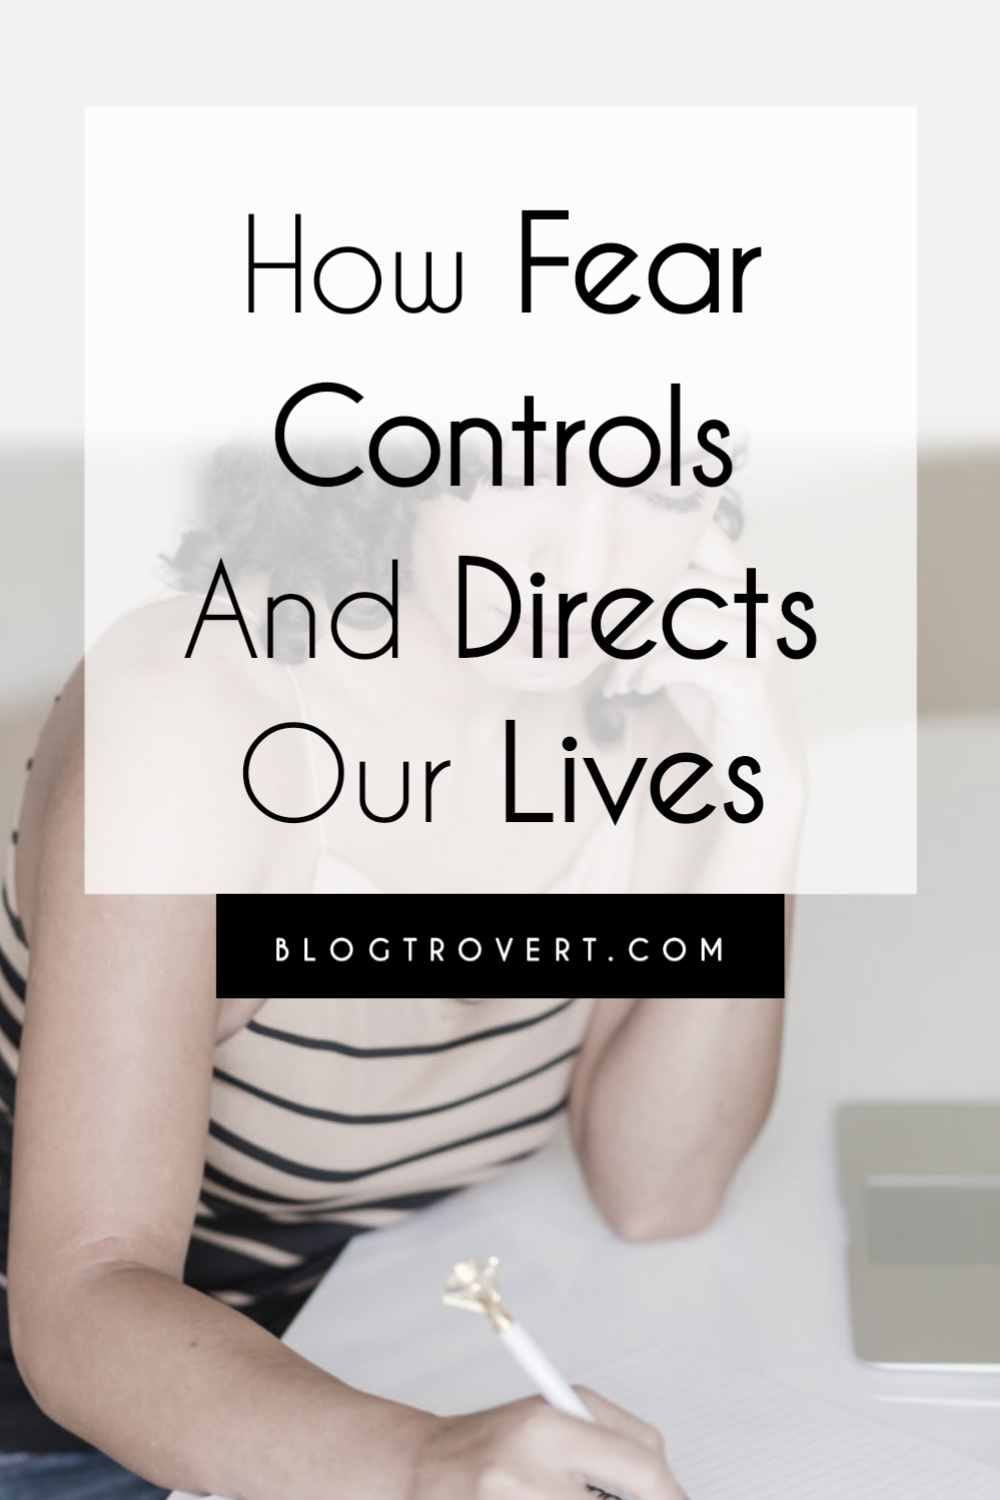 How fear controls us - Why we must take over 1